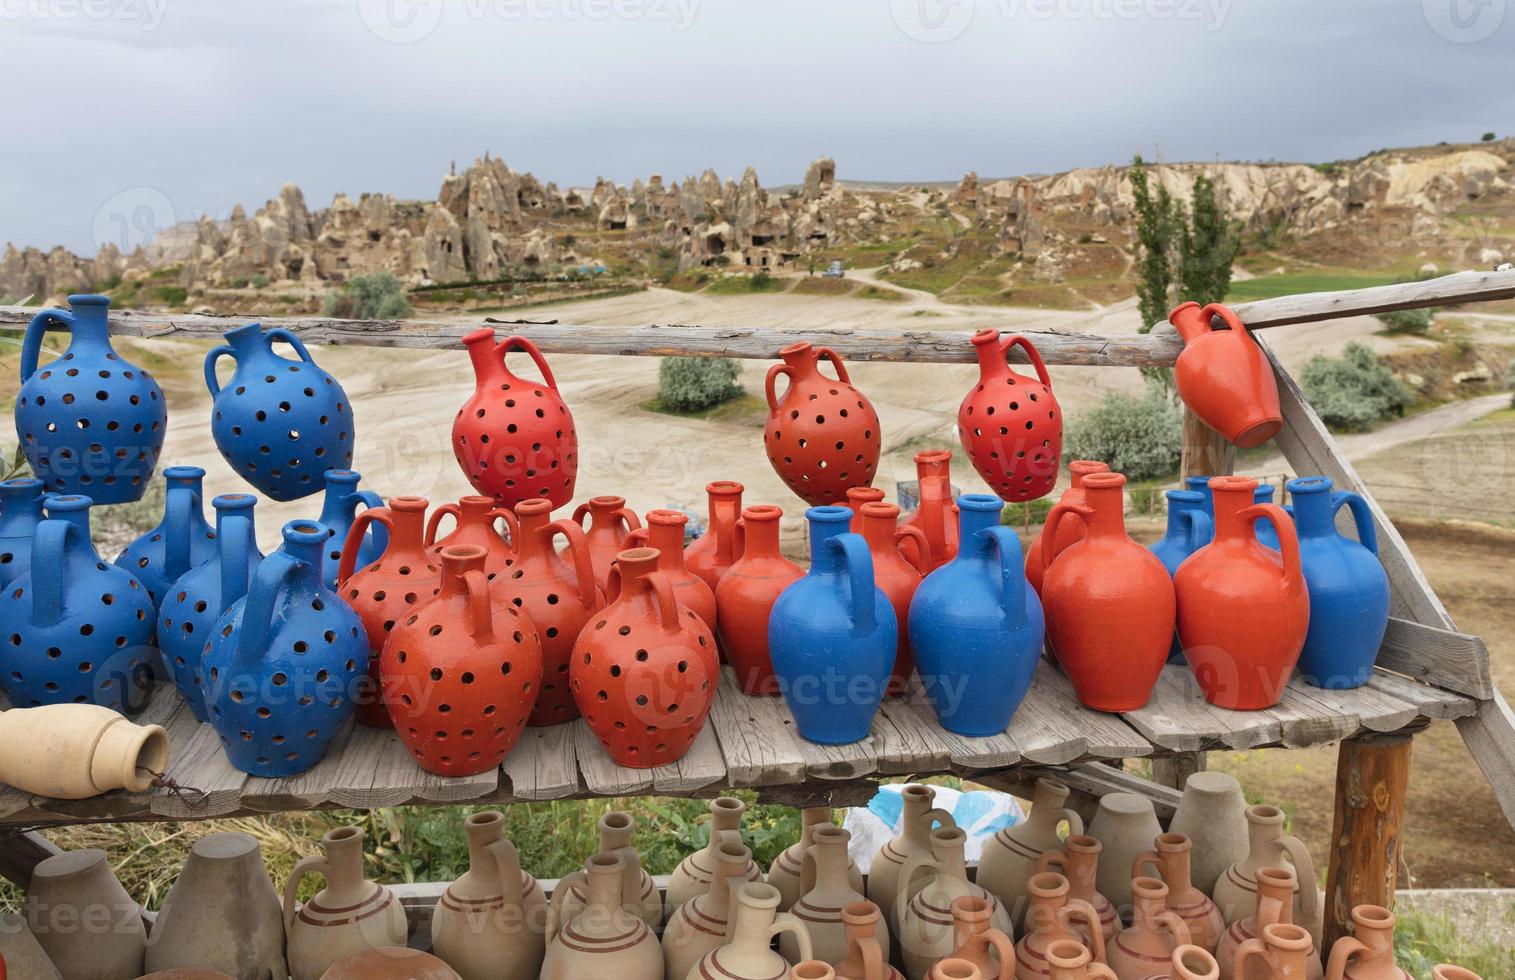 The multi-colored clay pots of desires stand on a wooden table in Cappadocia. photo